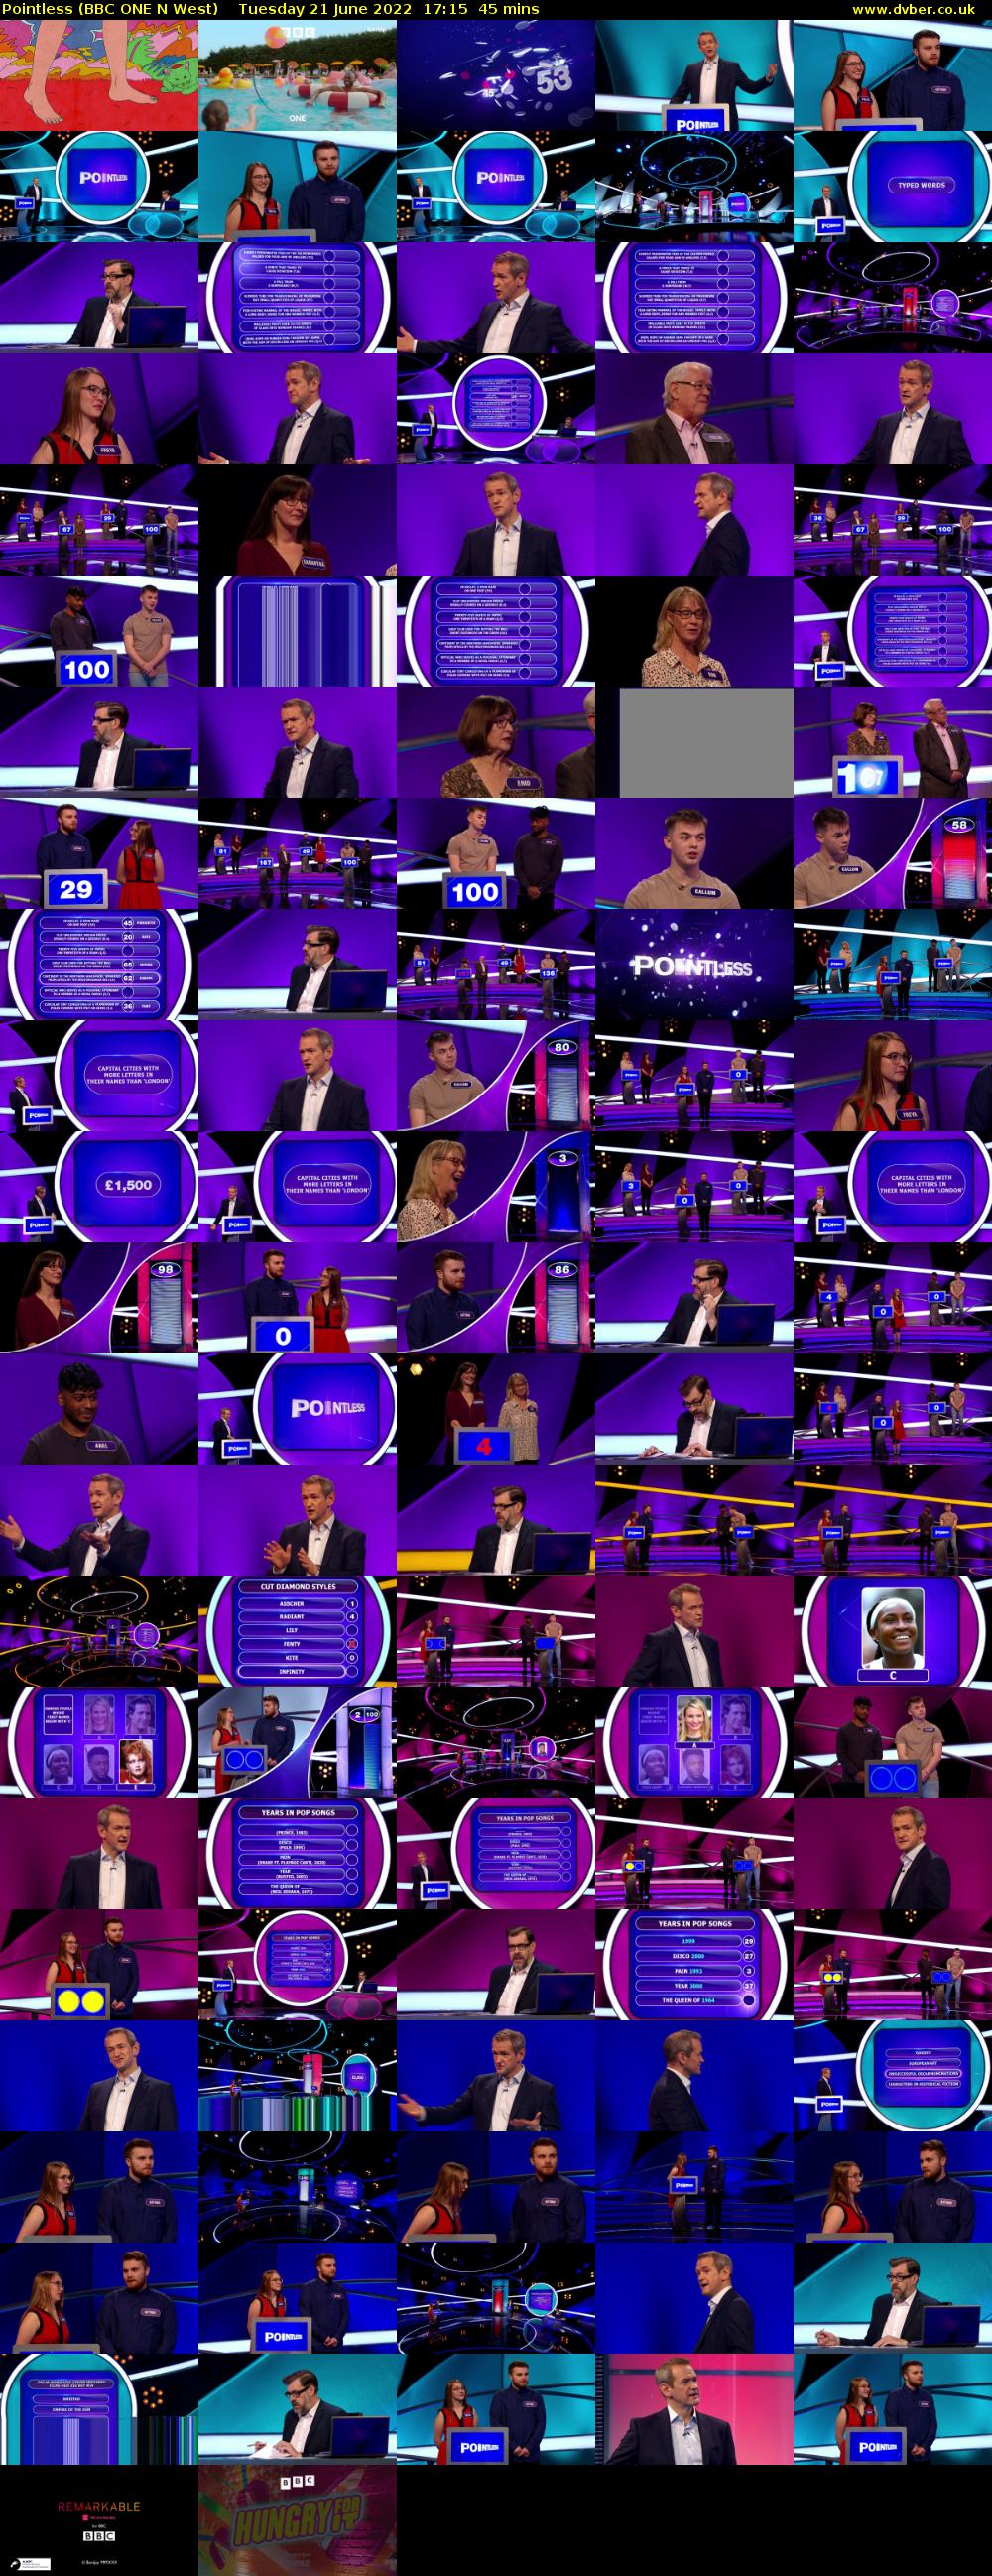 Pointless (BBC ONE N West) Tuesday 21 June 2022 17:15 - 18:00